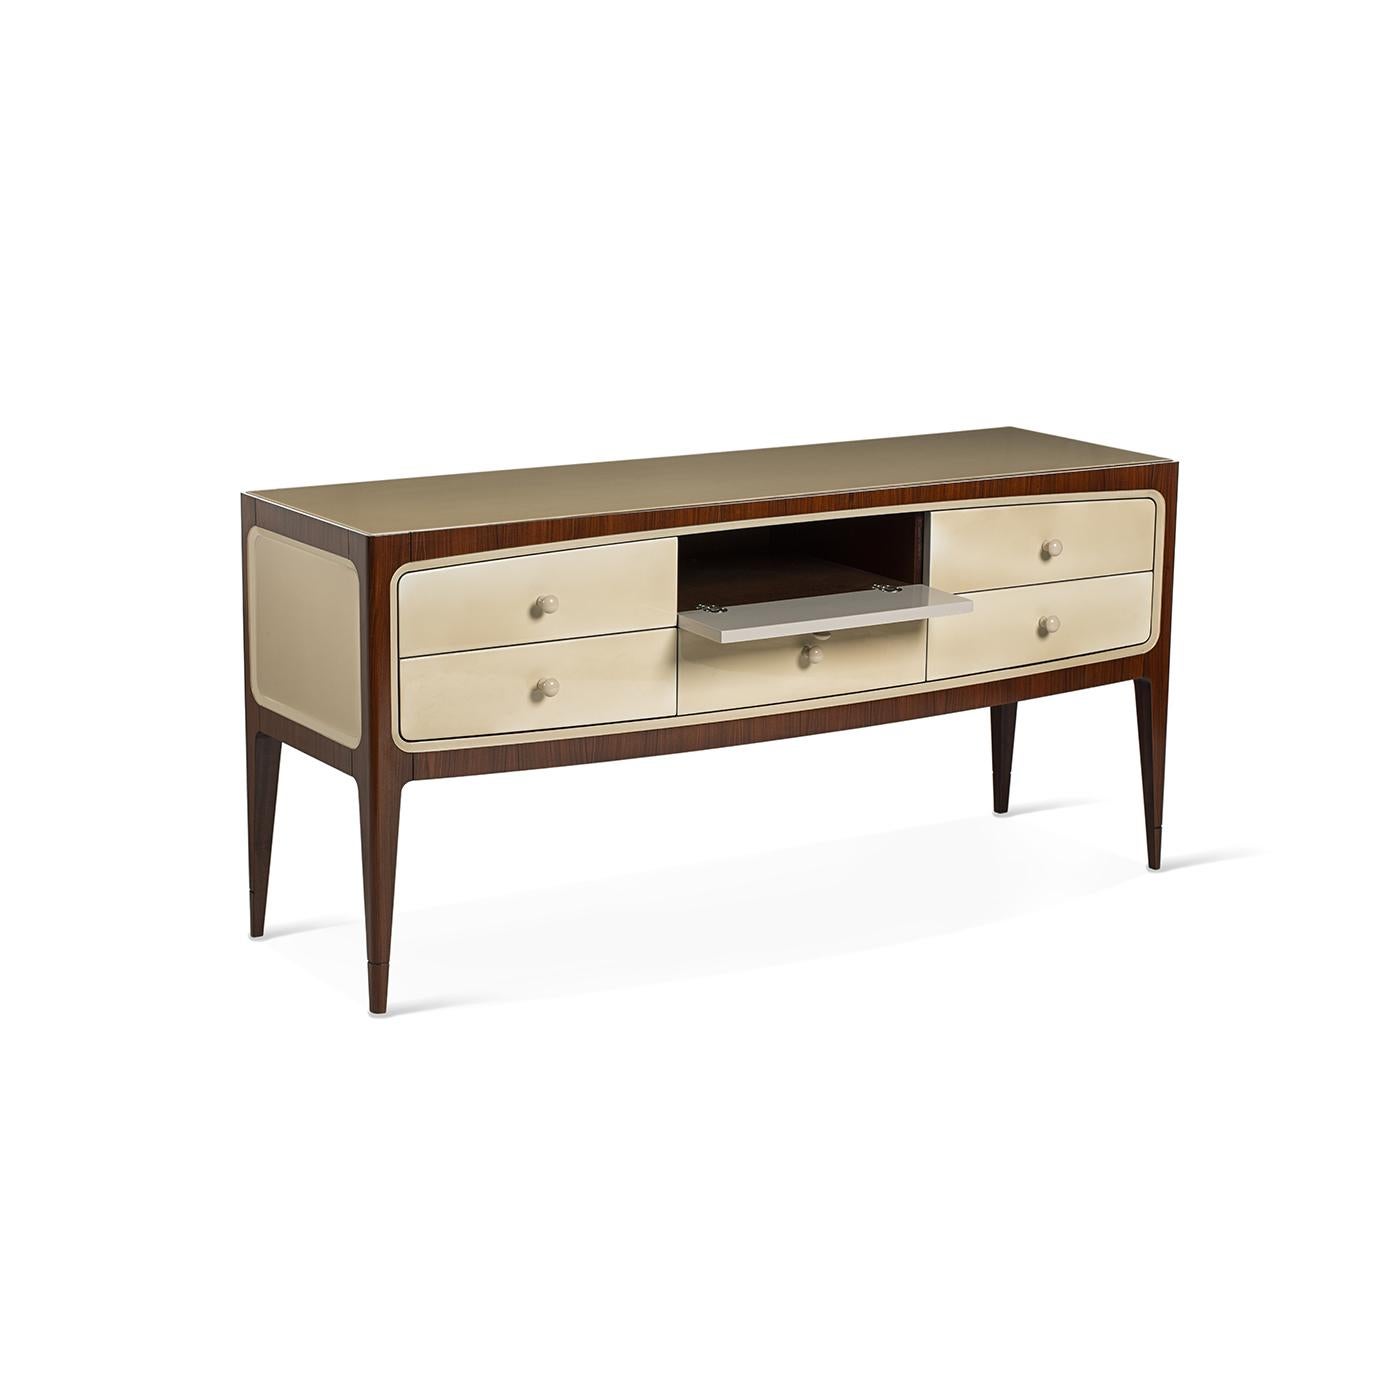 Contemporary 60S Style Beechwood Sideboard with Drawers 8712